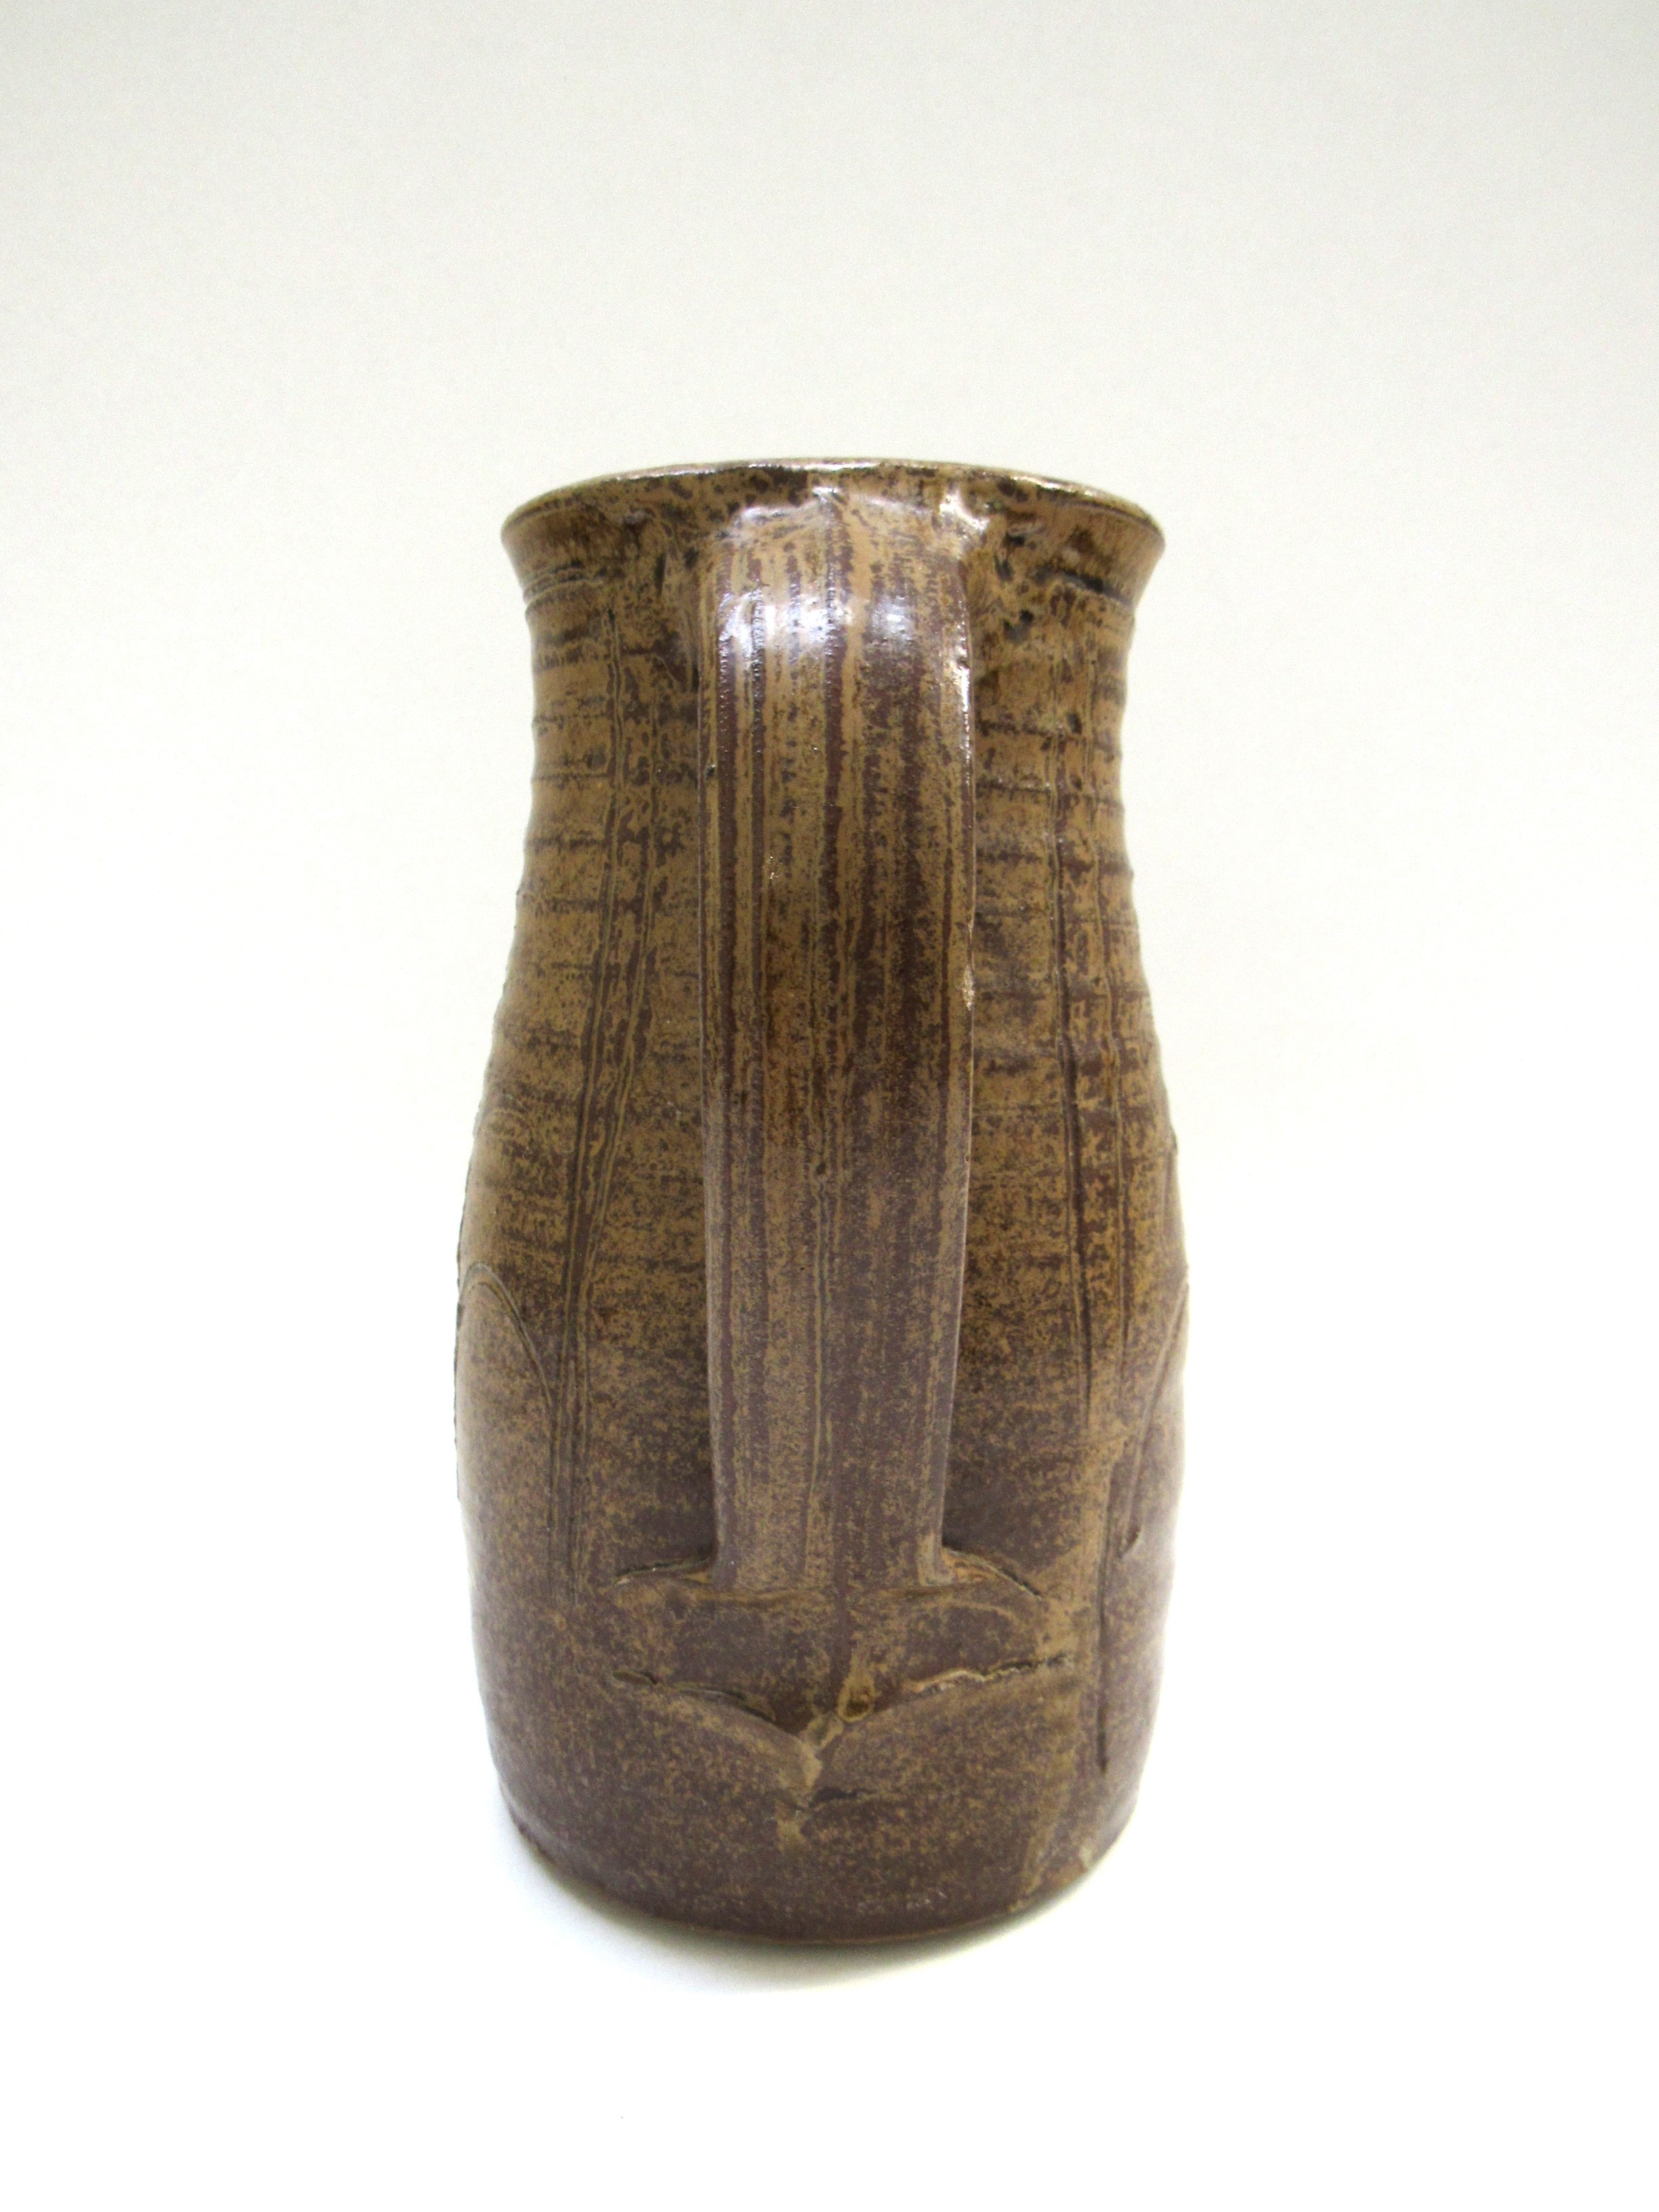 A studio pottery jug in the Leach tradition, incised detail in mottled brown glaze. Incised mark - Image 5 of 5